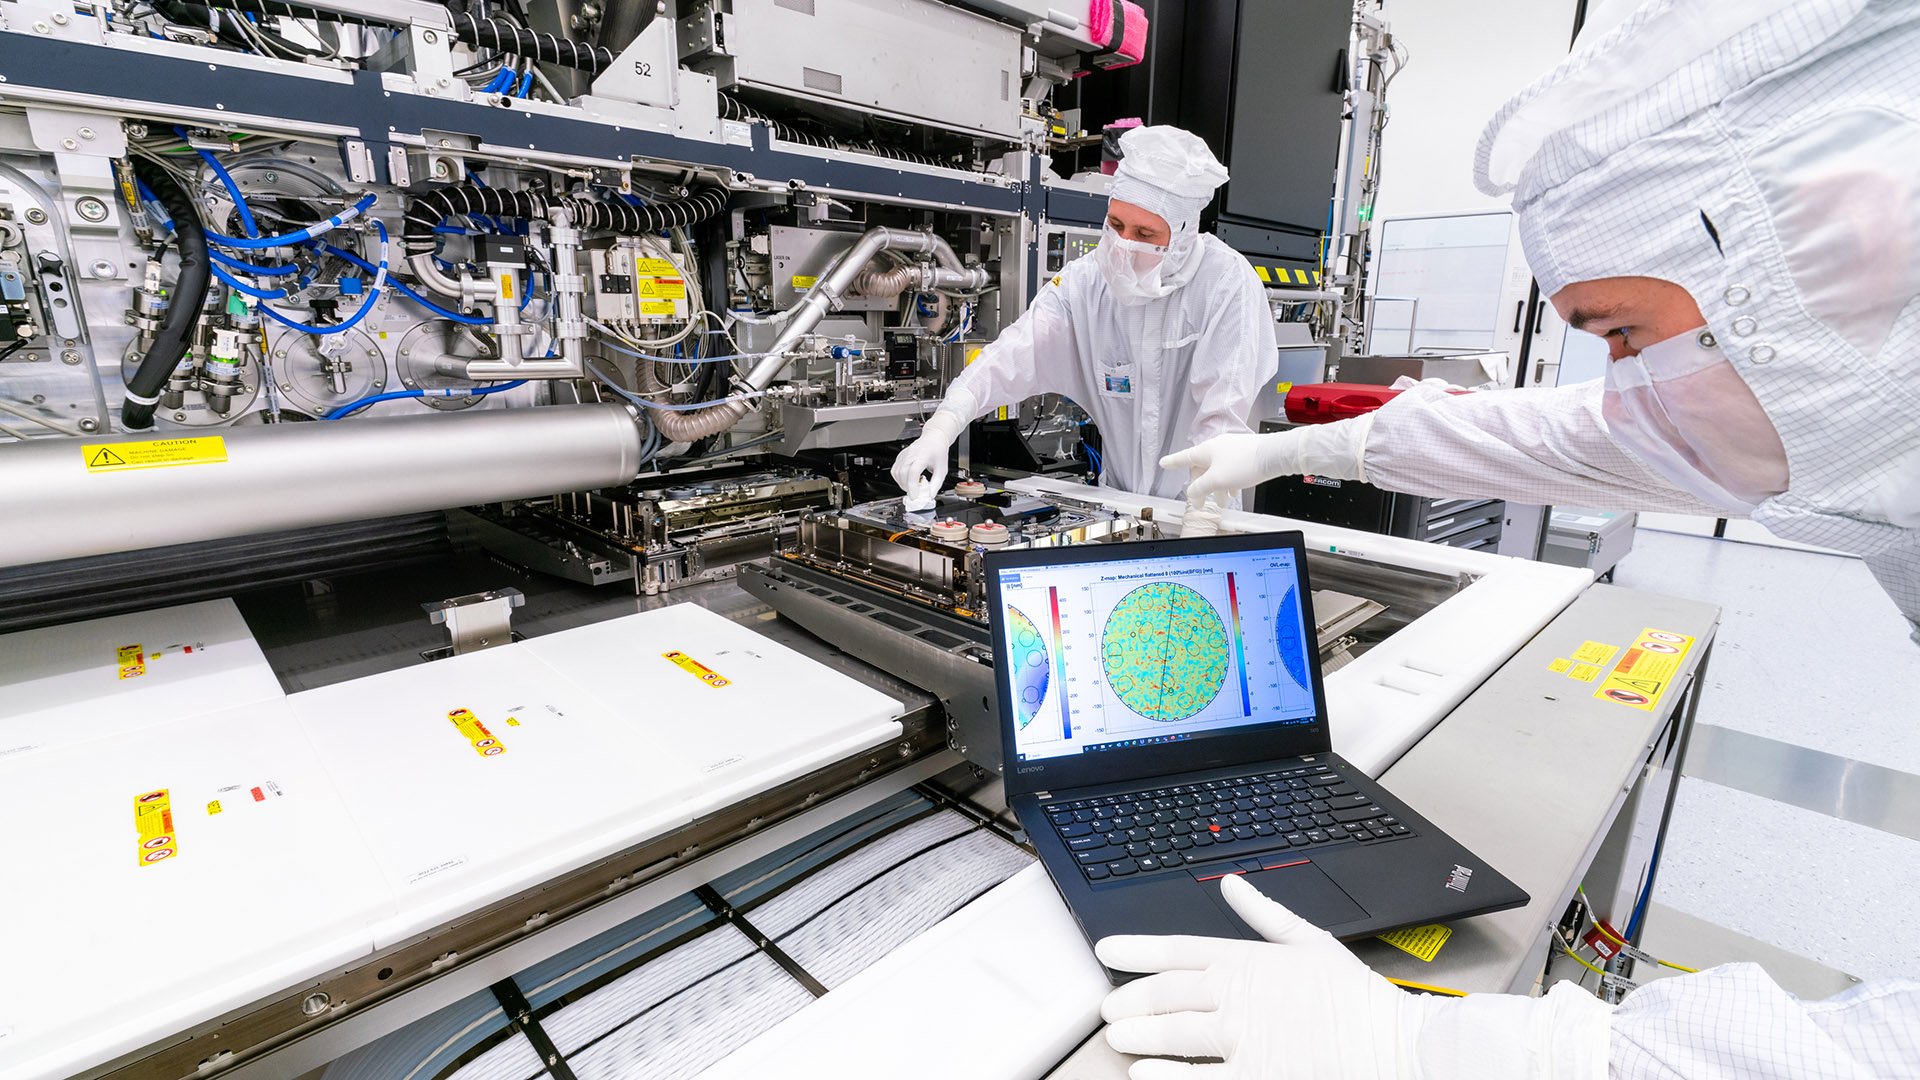 Two ASML engineers in white cleanroom suits use a laptop to test an EUV lithography machine in our factory in Veldhoven, the Netherlands.